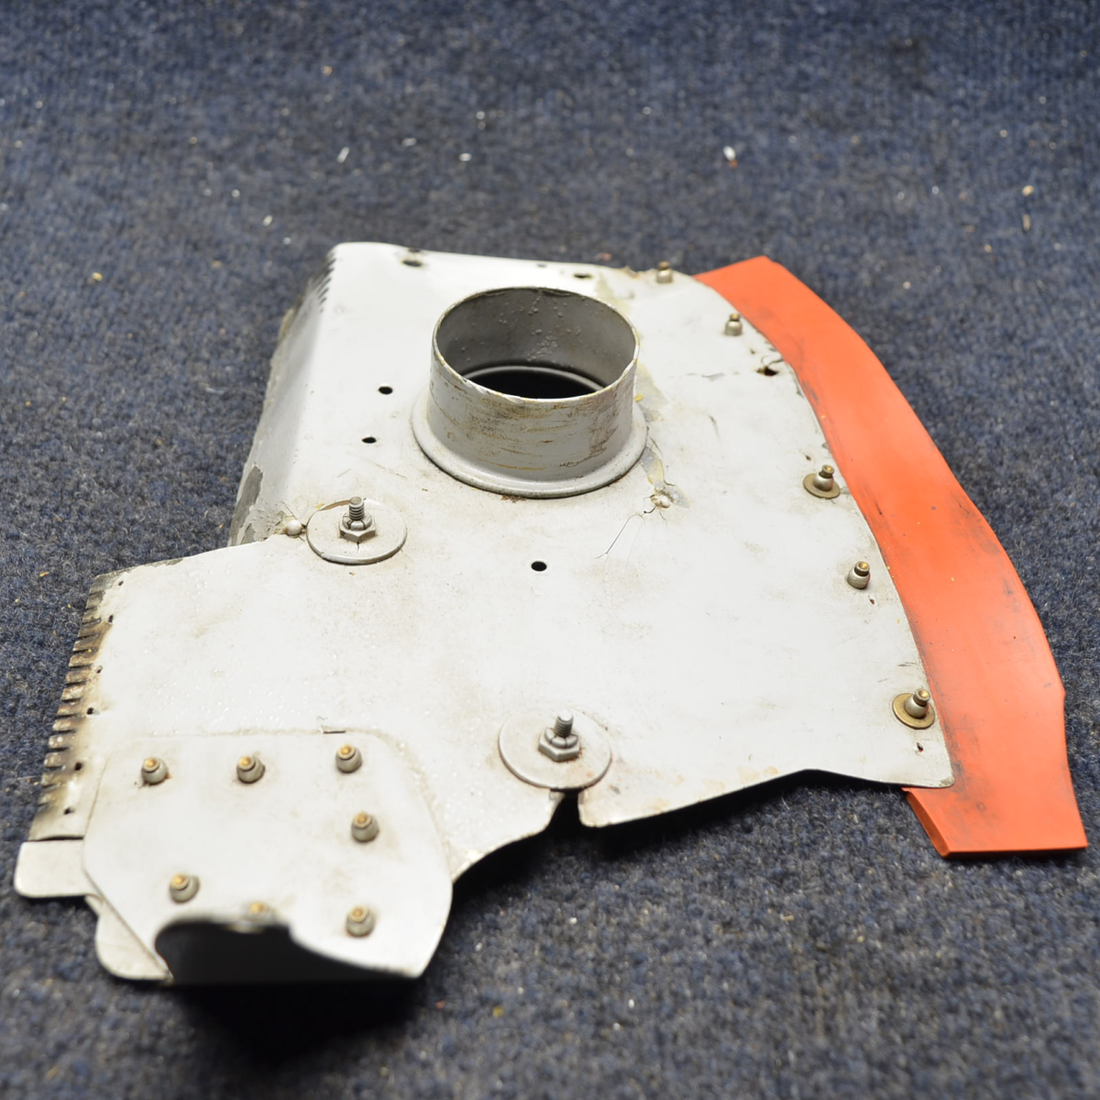 Used aircraft parts for sale, 502004-3 PIPER- CESSNA-BEECH- MOONEY VARIOS GRUMMAN FRONT SIDE BAFFLE